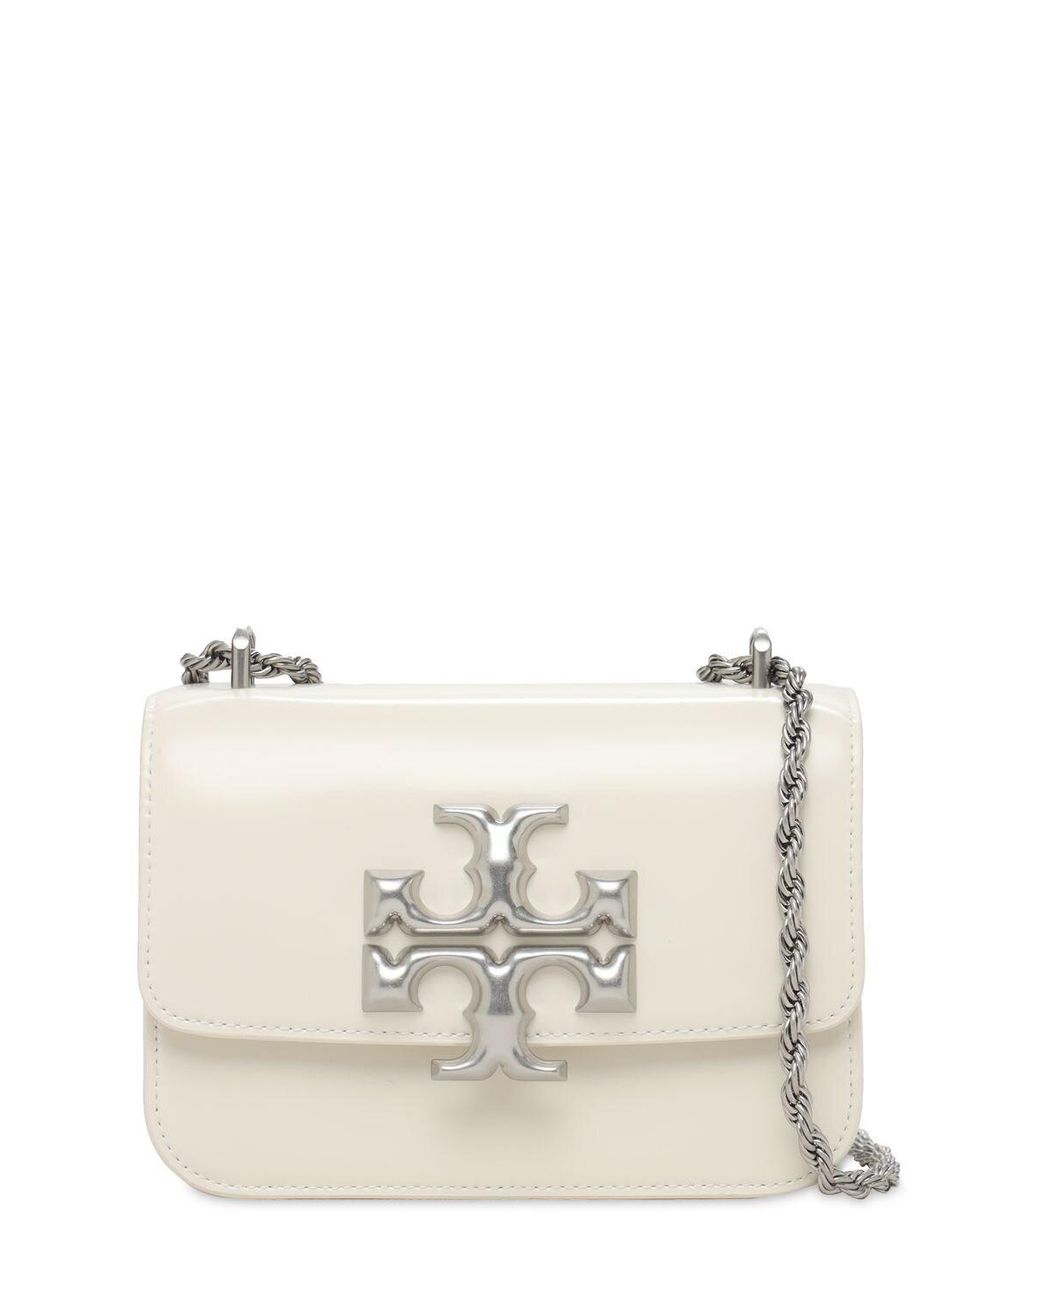 Tory Burch Eleanor Sm Patent Leather Shoulder Bag | Lyst